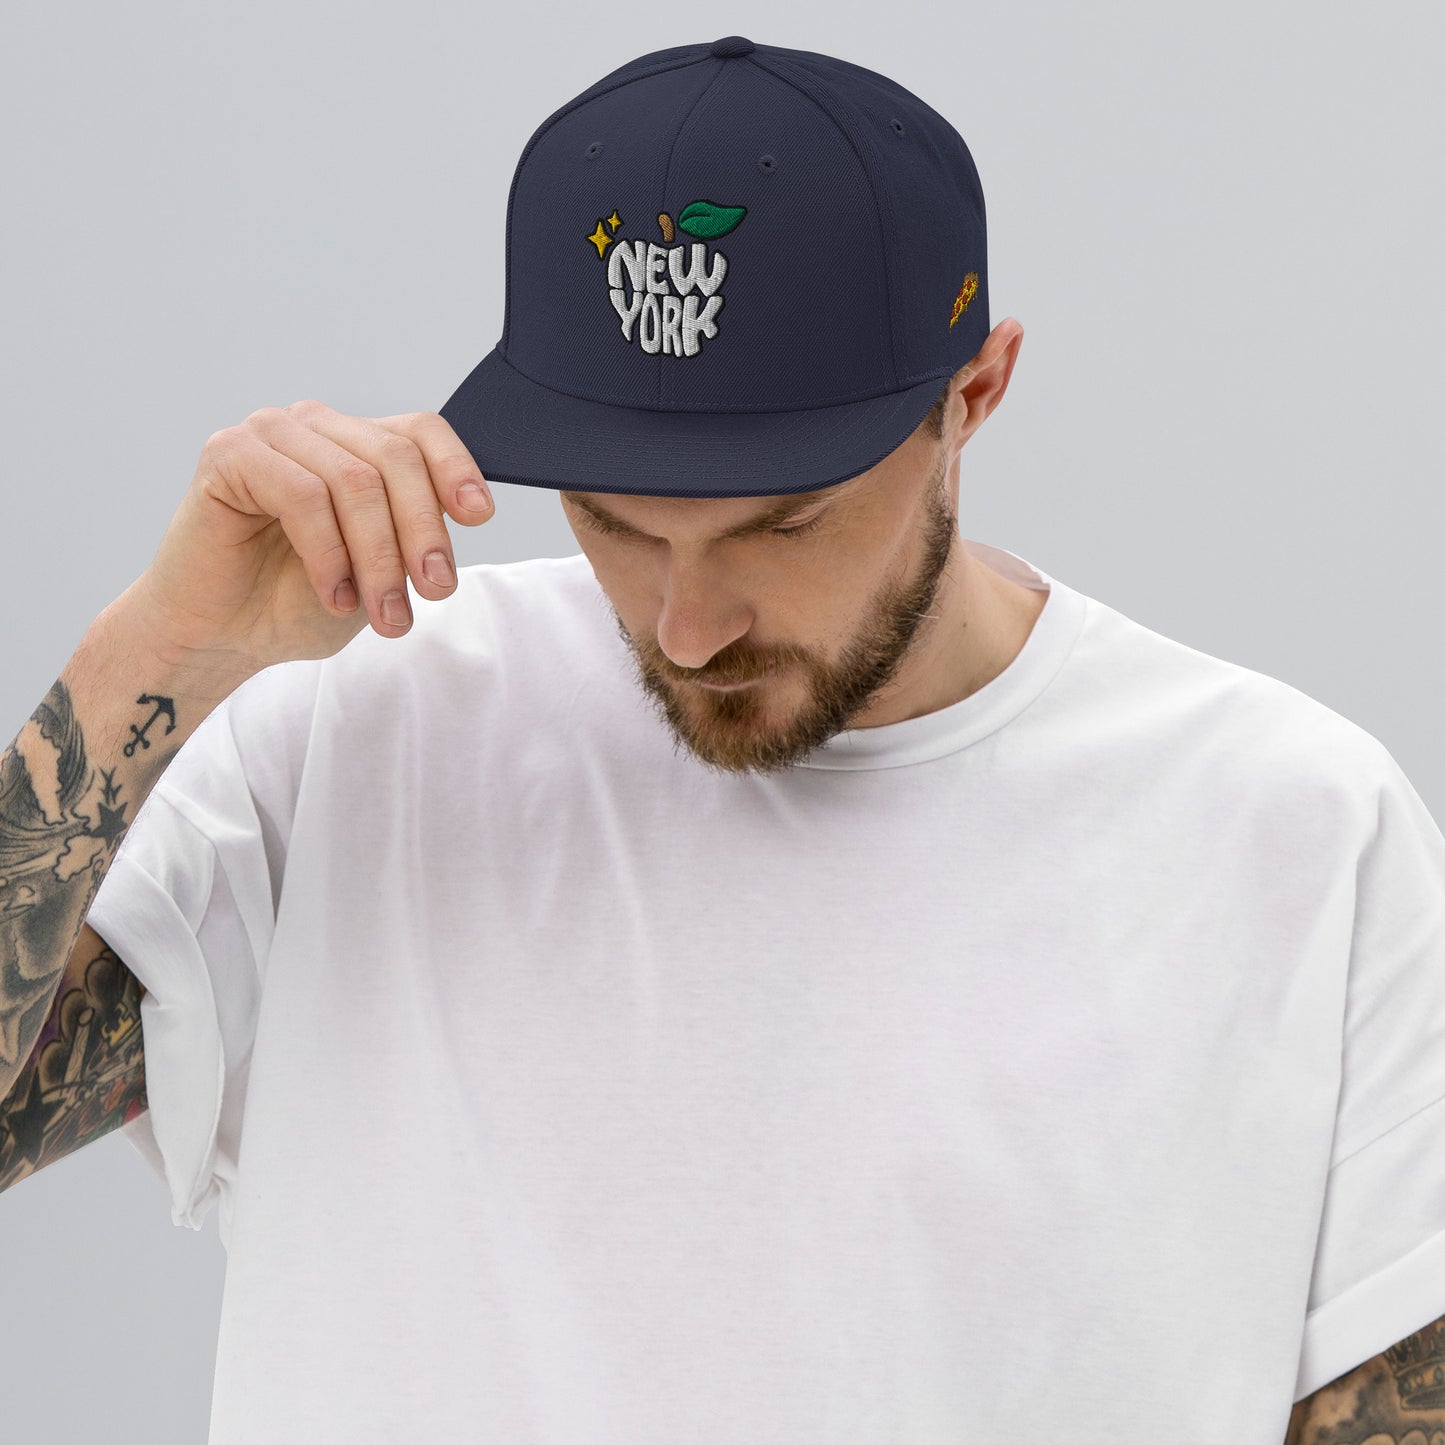 New York Apple Logo Embroidered Navy Snapback Hat (Pizza) Scattered Streetwear